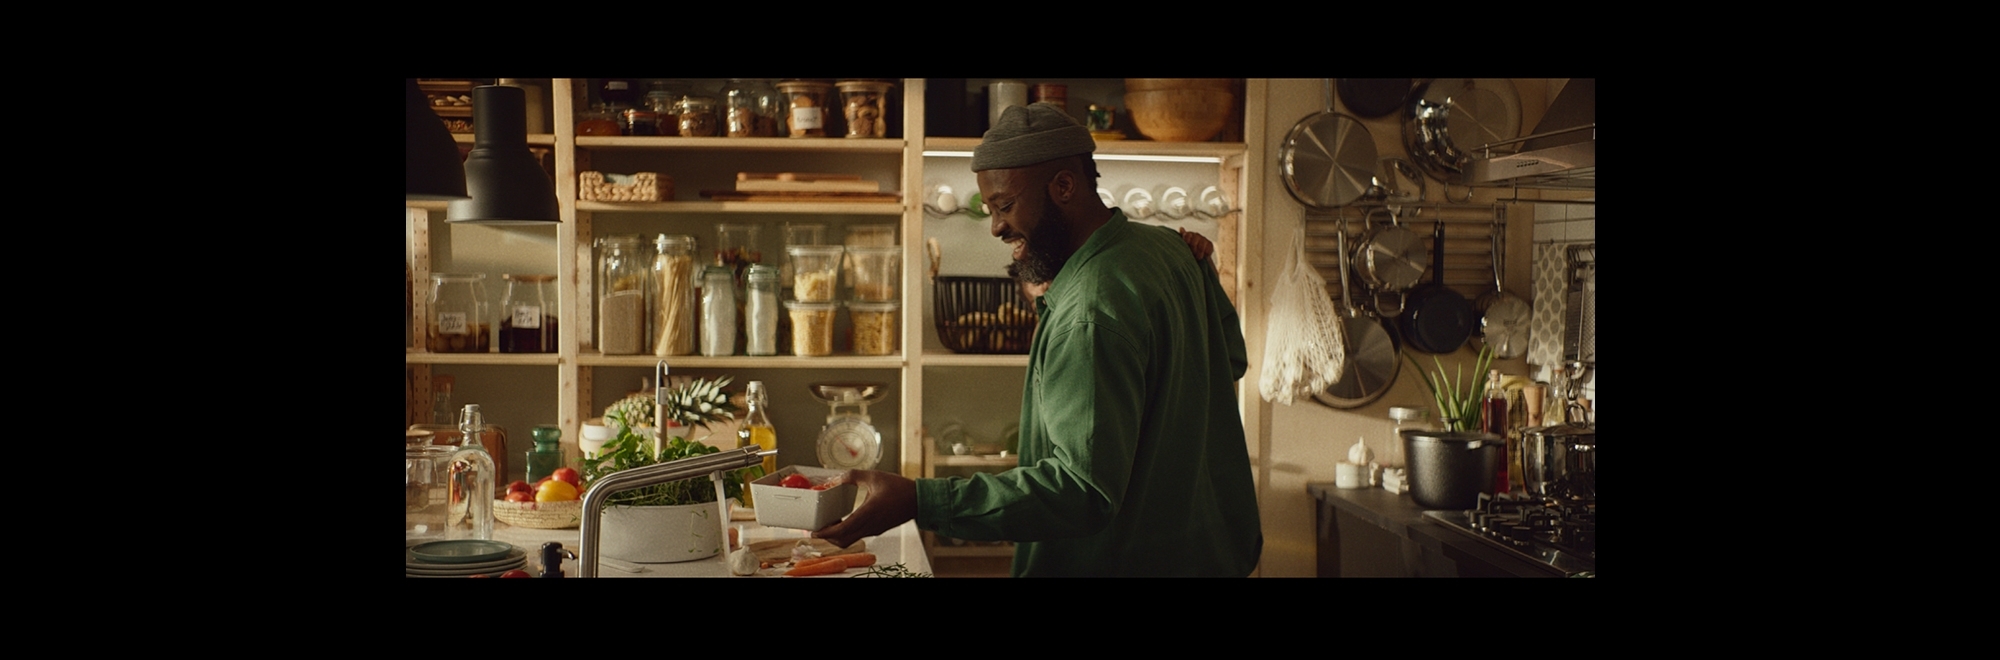 Ikea launches new campaign: 'Fortune favours the frugal'